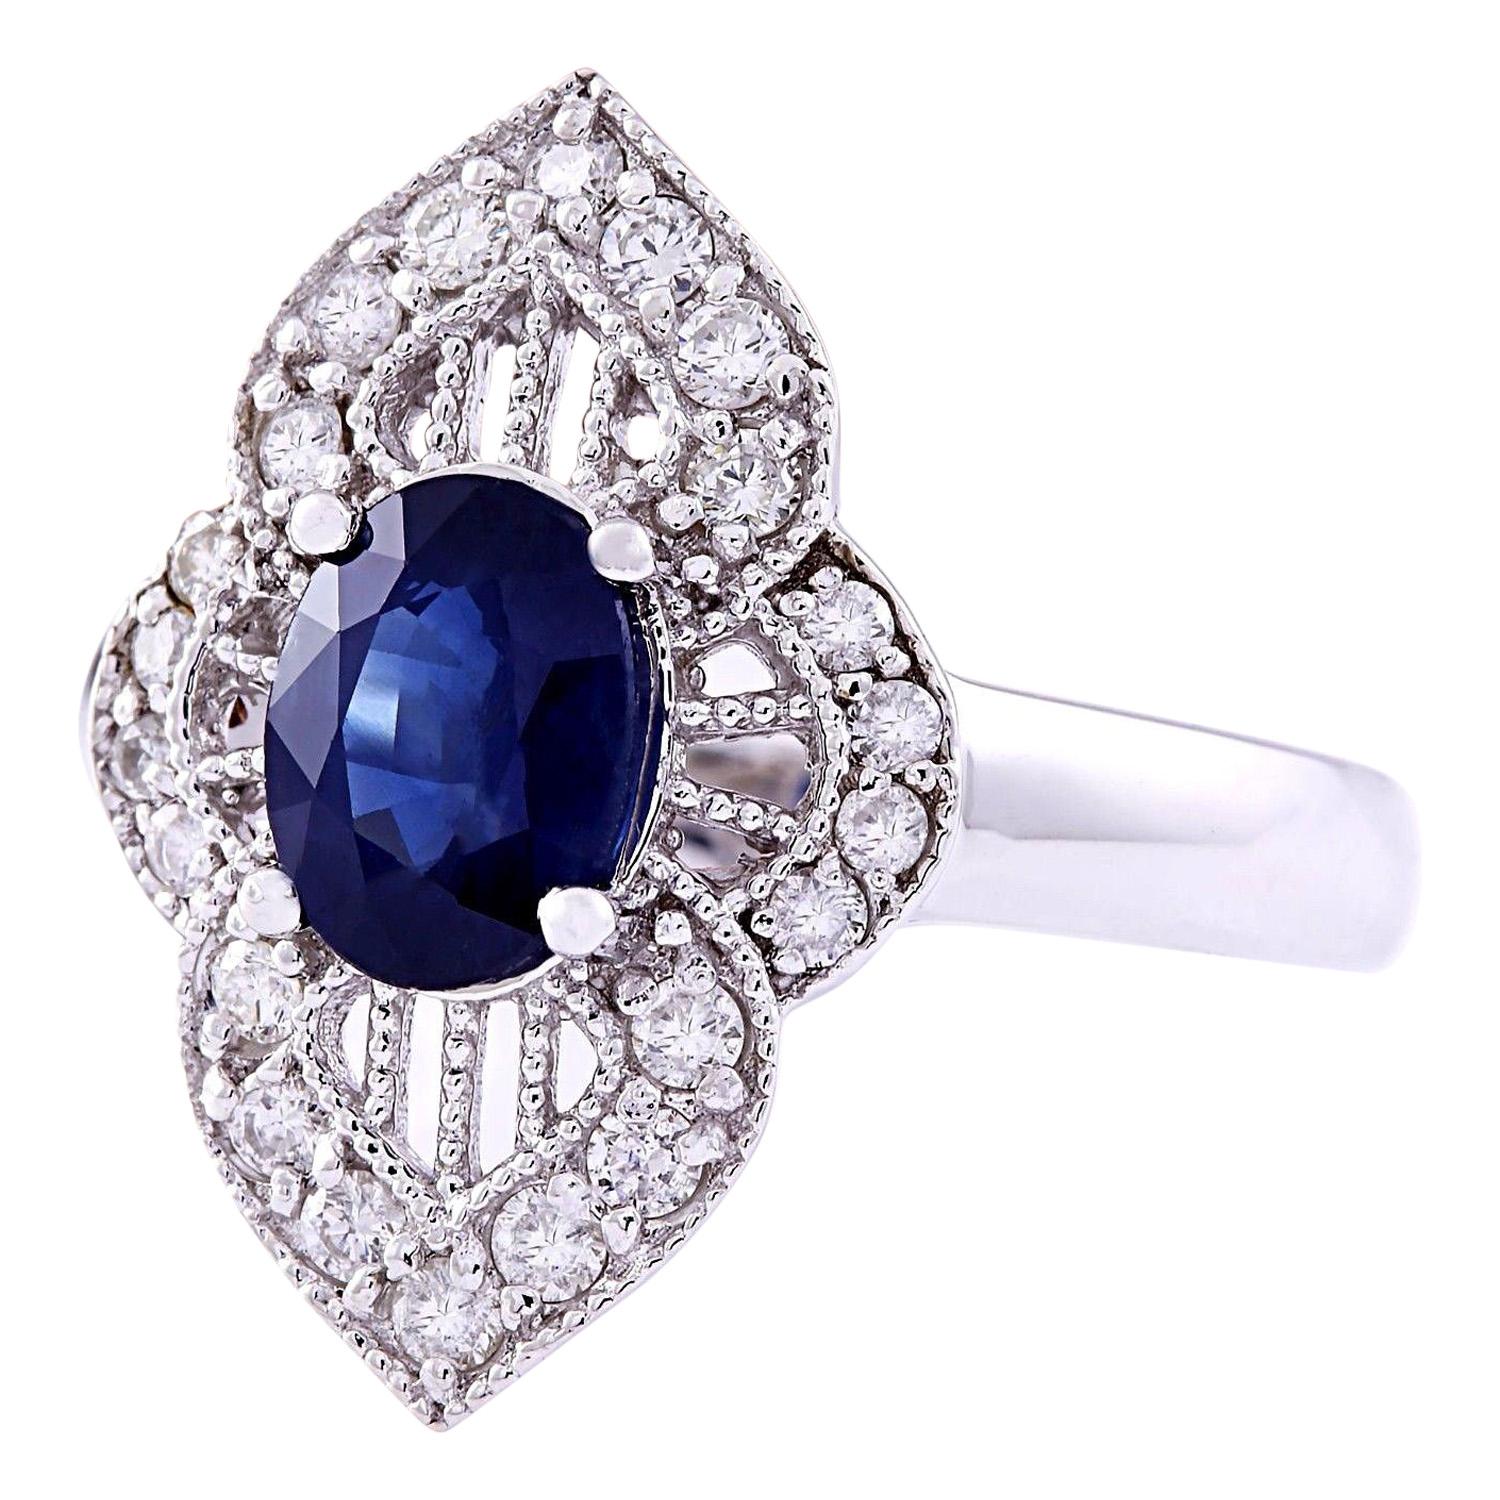 Indulge in the elegance of our 14K Solid White Gold Diamond Ring featuring a captivating 1.85 Carat Natural Sapphire gemstone. Crafted with meticulous attention to detail, the mainstone boasts a dazzling 1.45 Carats, with dimensions of 8.00x6.00 mm,